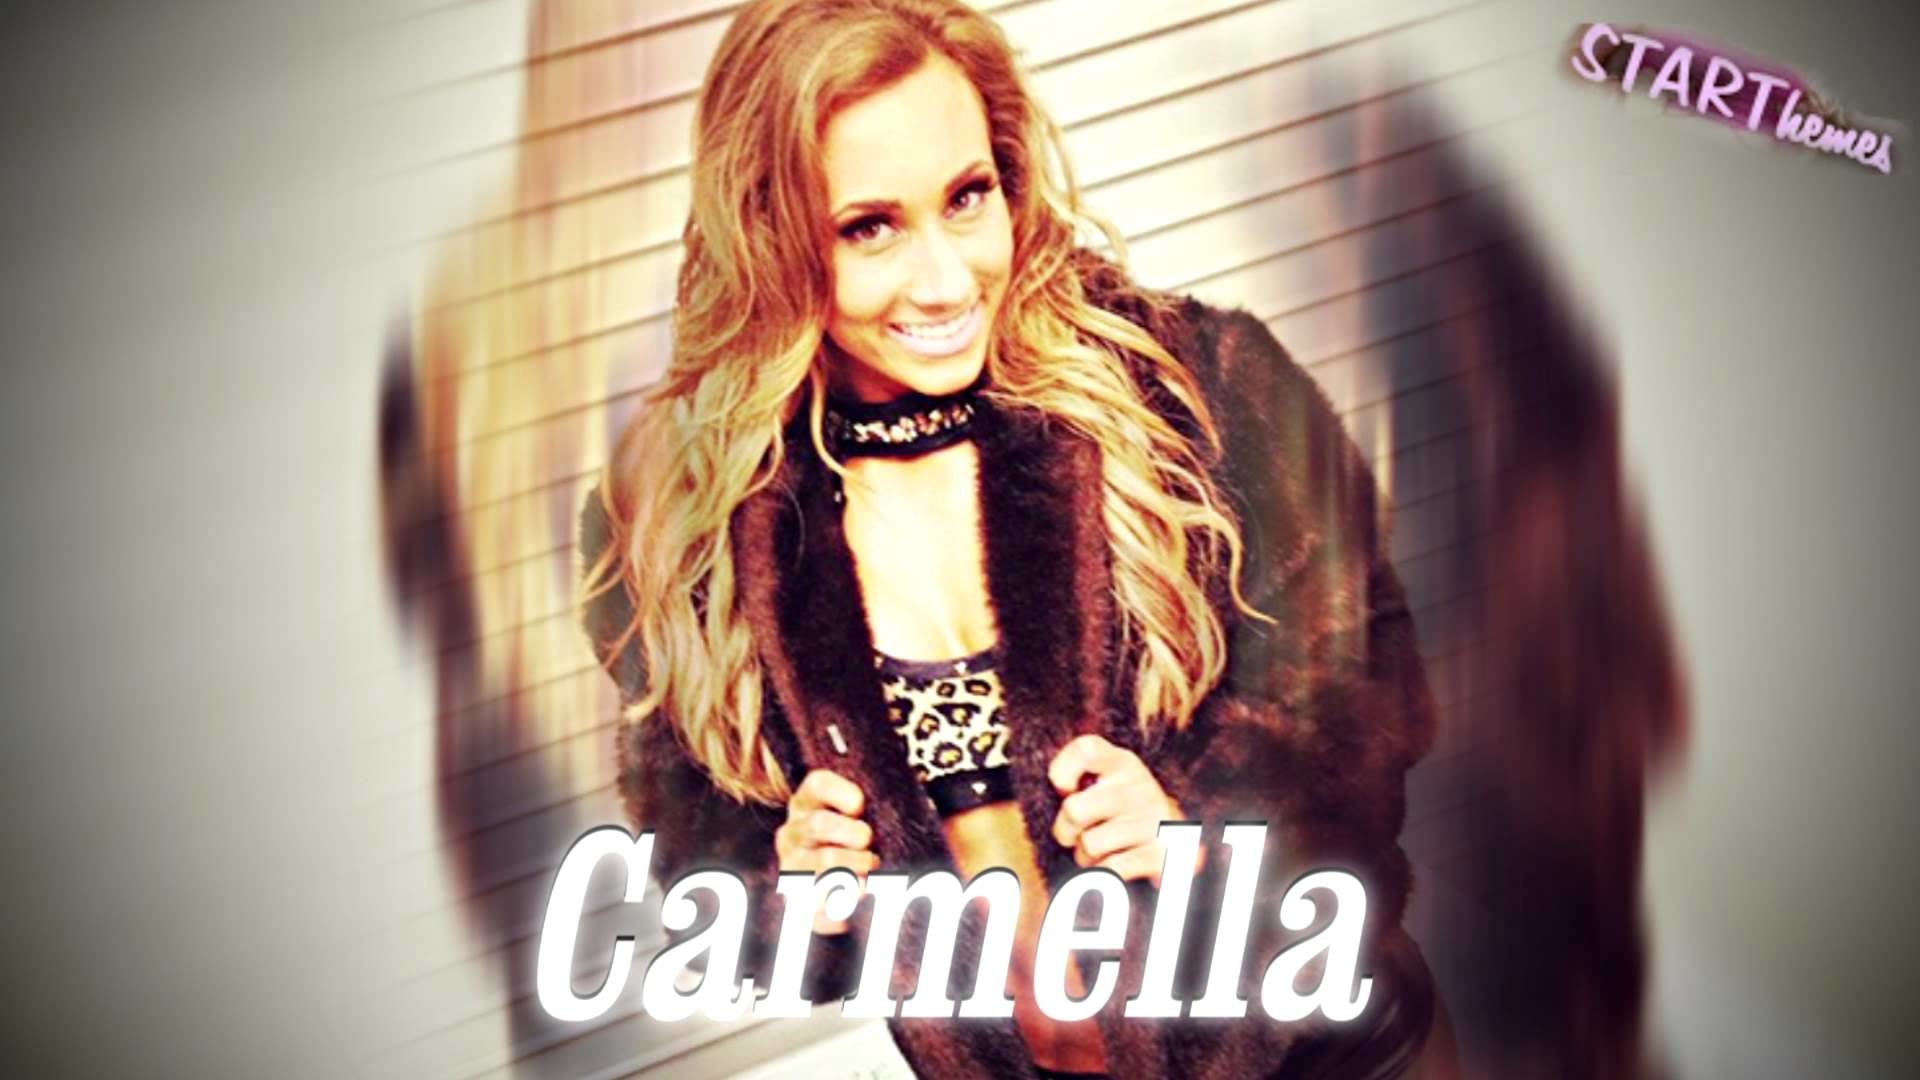 1920x1080 ... Nxt divas and Wwe female WWE Carmella Queen of Staten Island Wallpaper  by TheDouglySoul on .